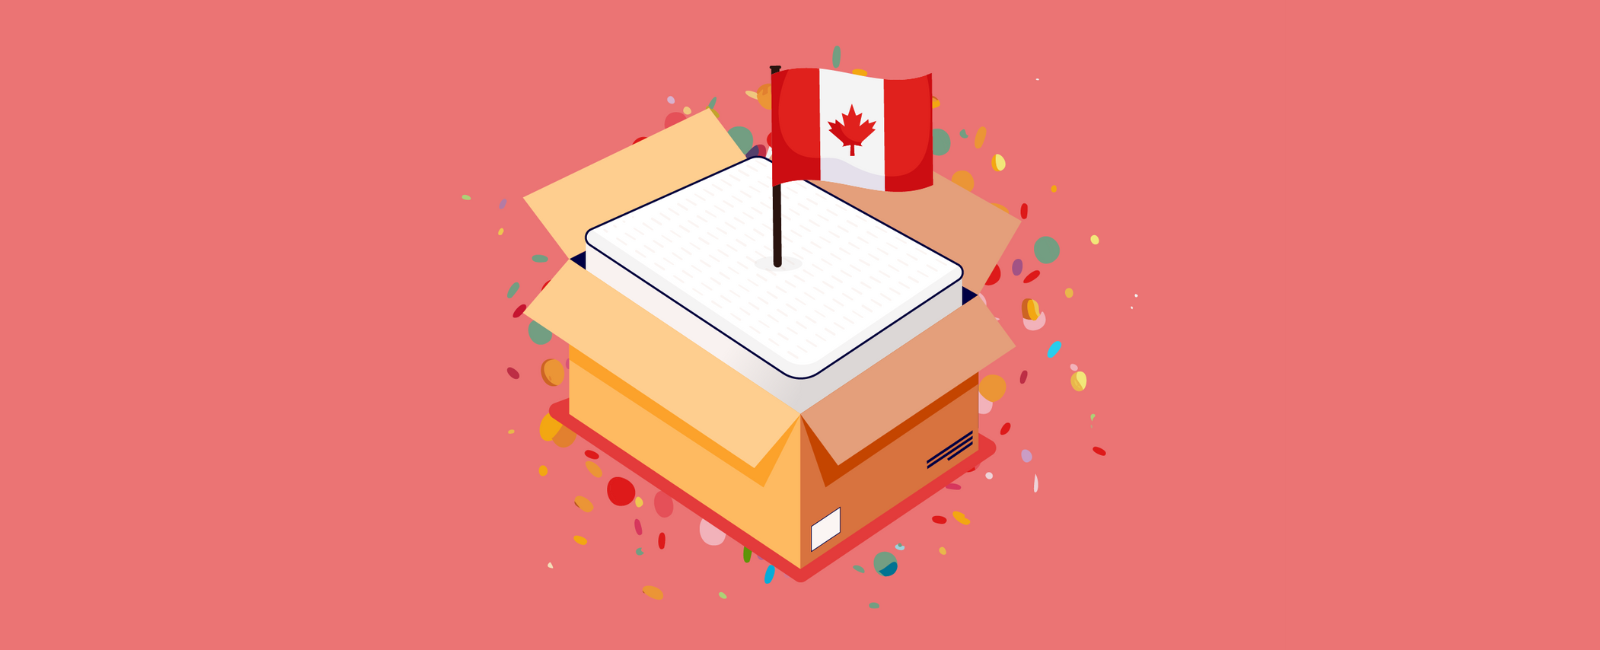 canadian mattress brands hero image showing a mattress in a box with a Canadian flag and confetti